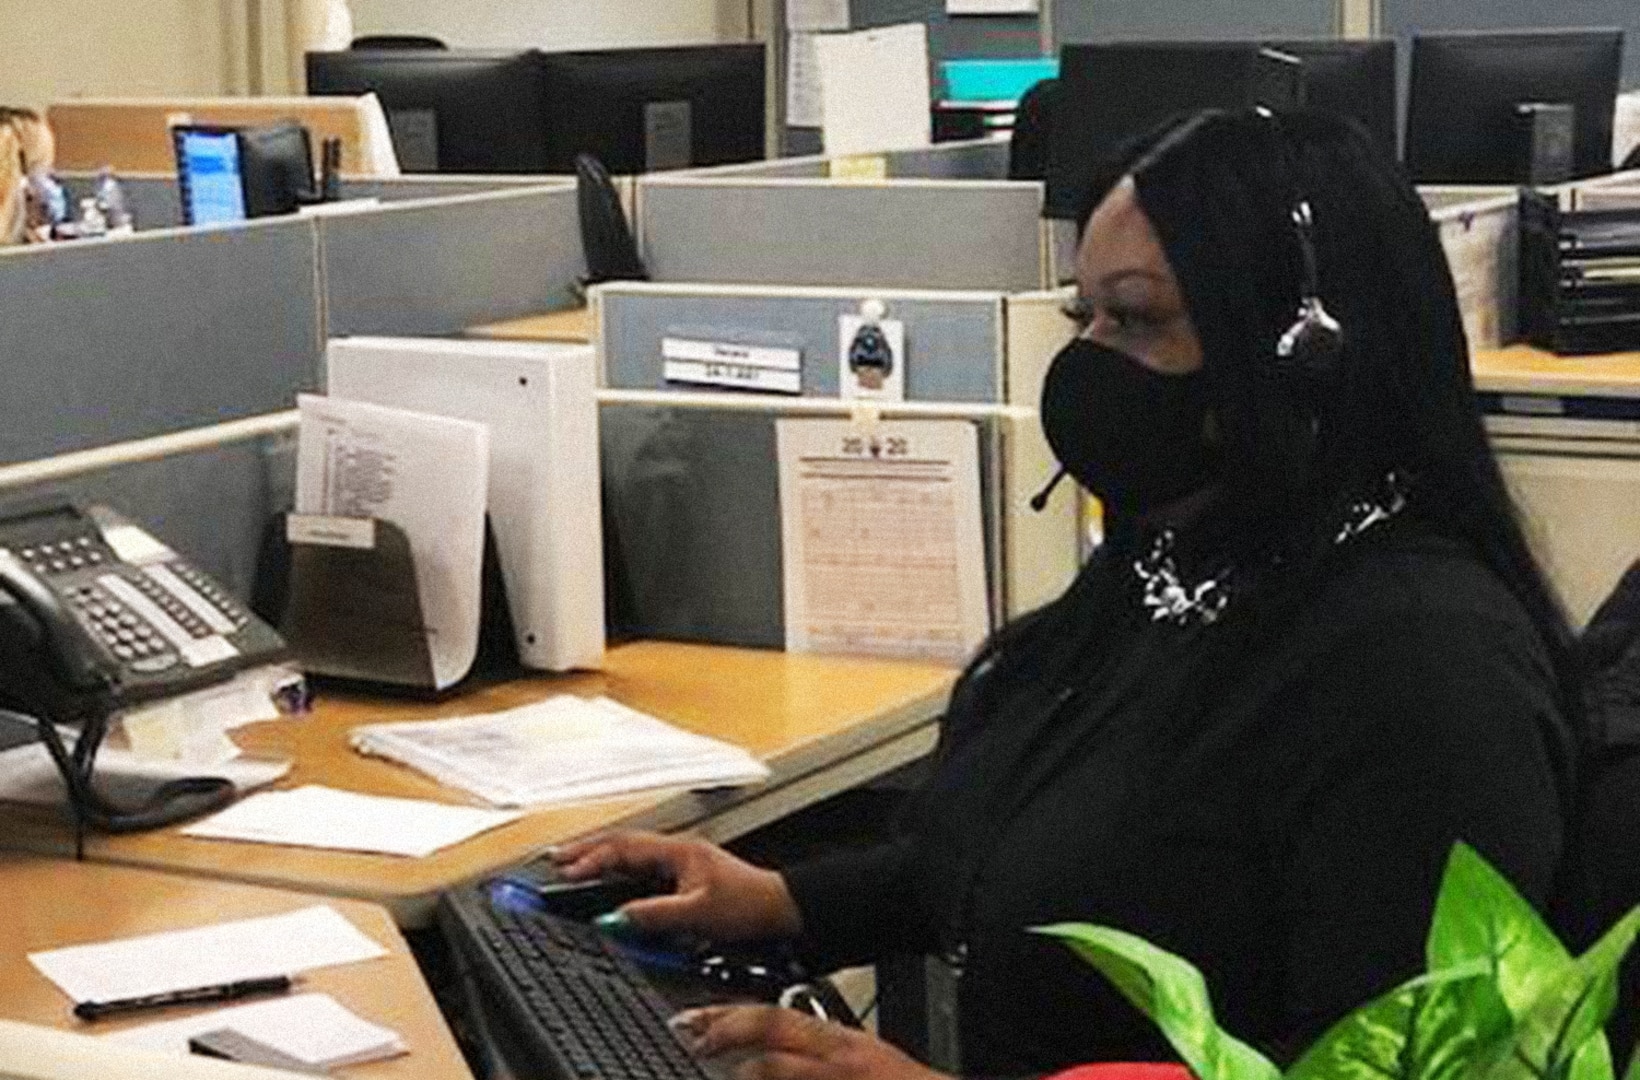 Black woman wearing a black shirt, face mask and headset sits at a desk in front of a computer.